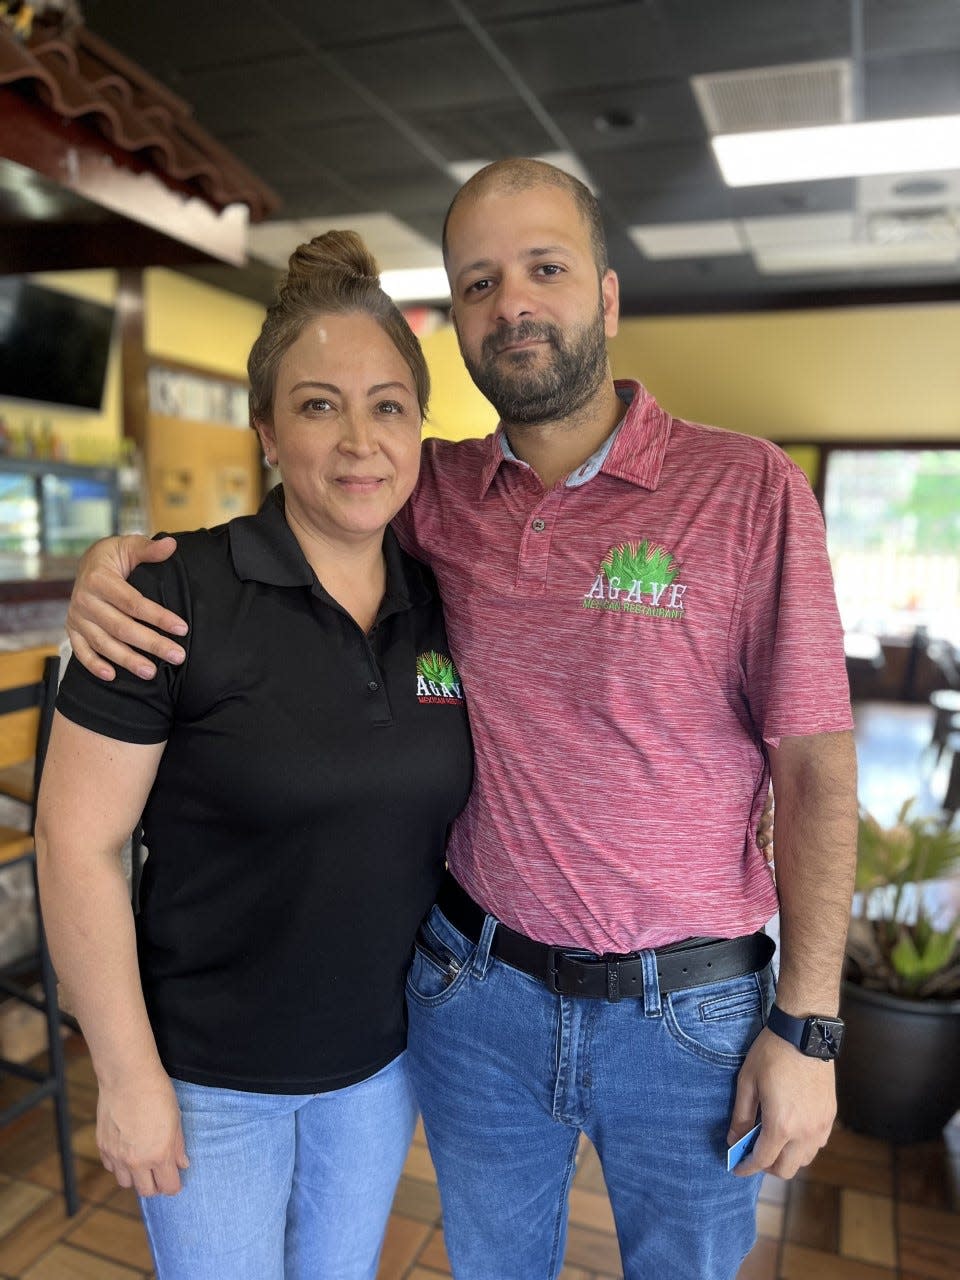 Owners of the Agave Mexican Restaurant at East Franklin Boulevard, Abi Acosta and Ana Zarate will offer a $5 Estrella Jalisco beer, tequila and margarita special as well as $10 "fake" Mexican dishes during Cinco de Mayo.